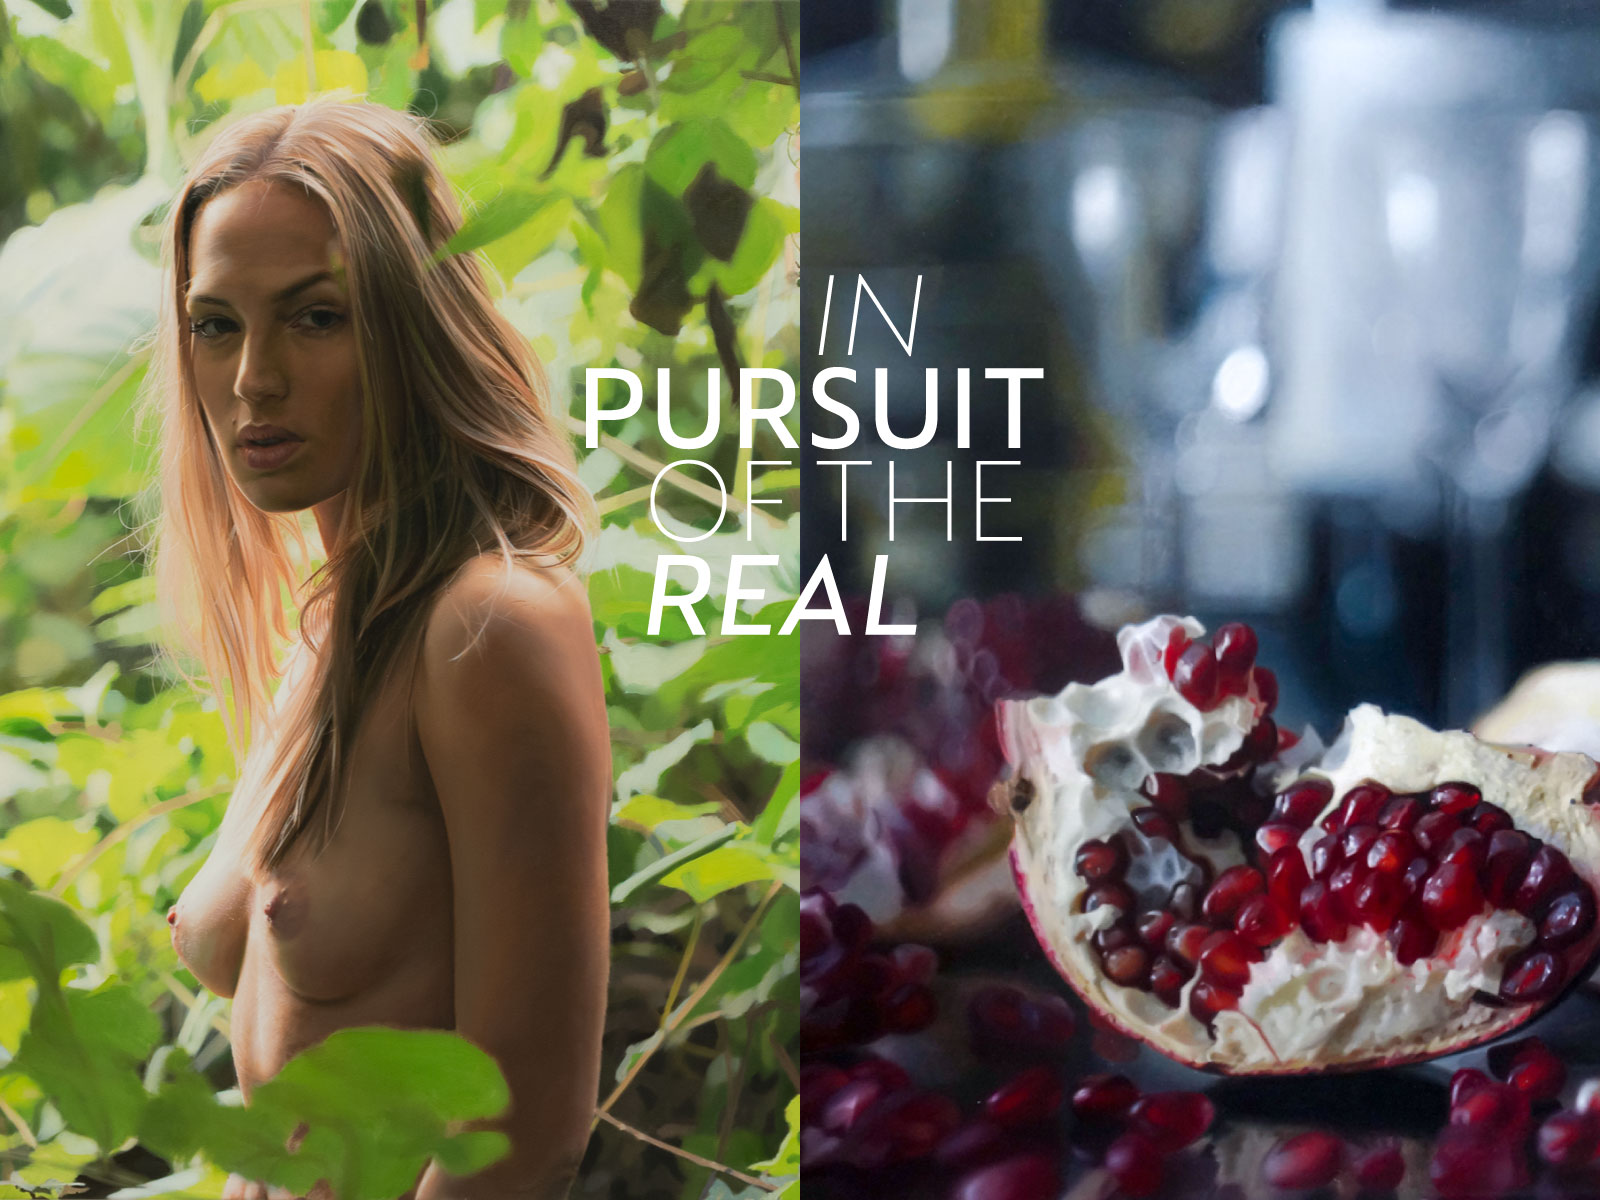 Yigal Ozeri & Jan Mikulka / In Pursuit of the Real exhibition will remain opened until 31/5 2019